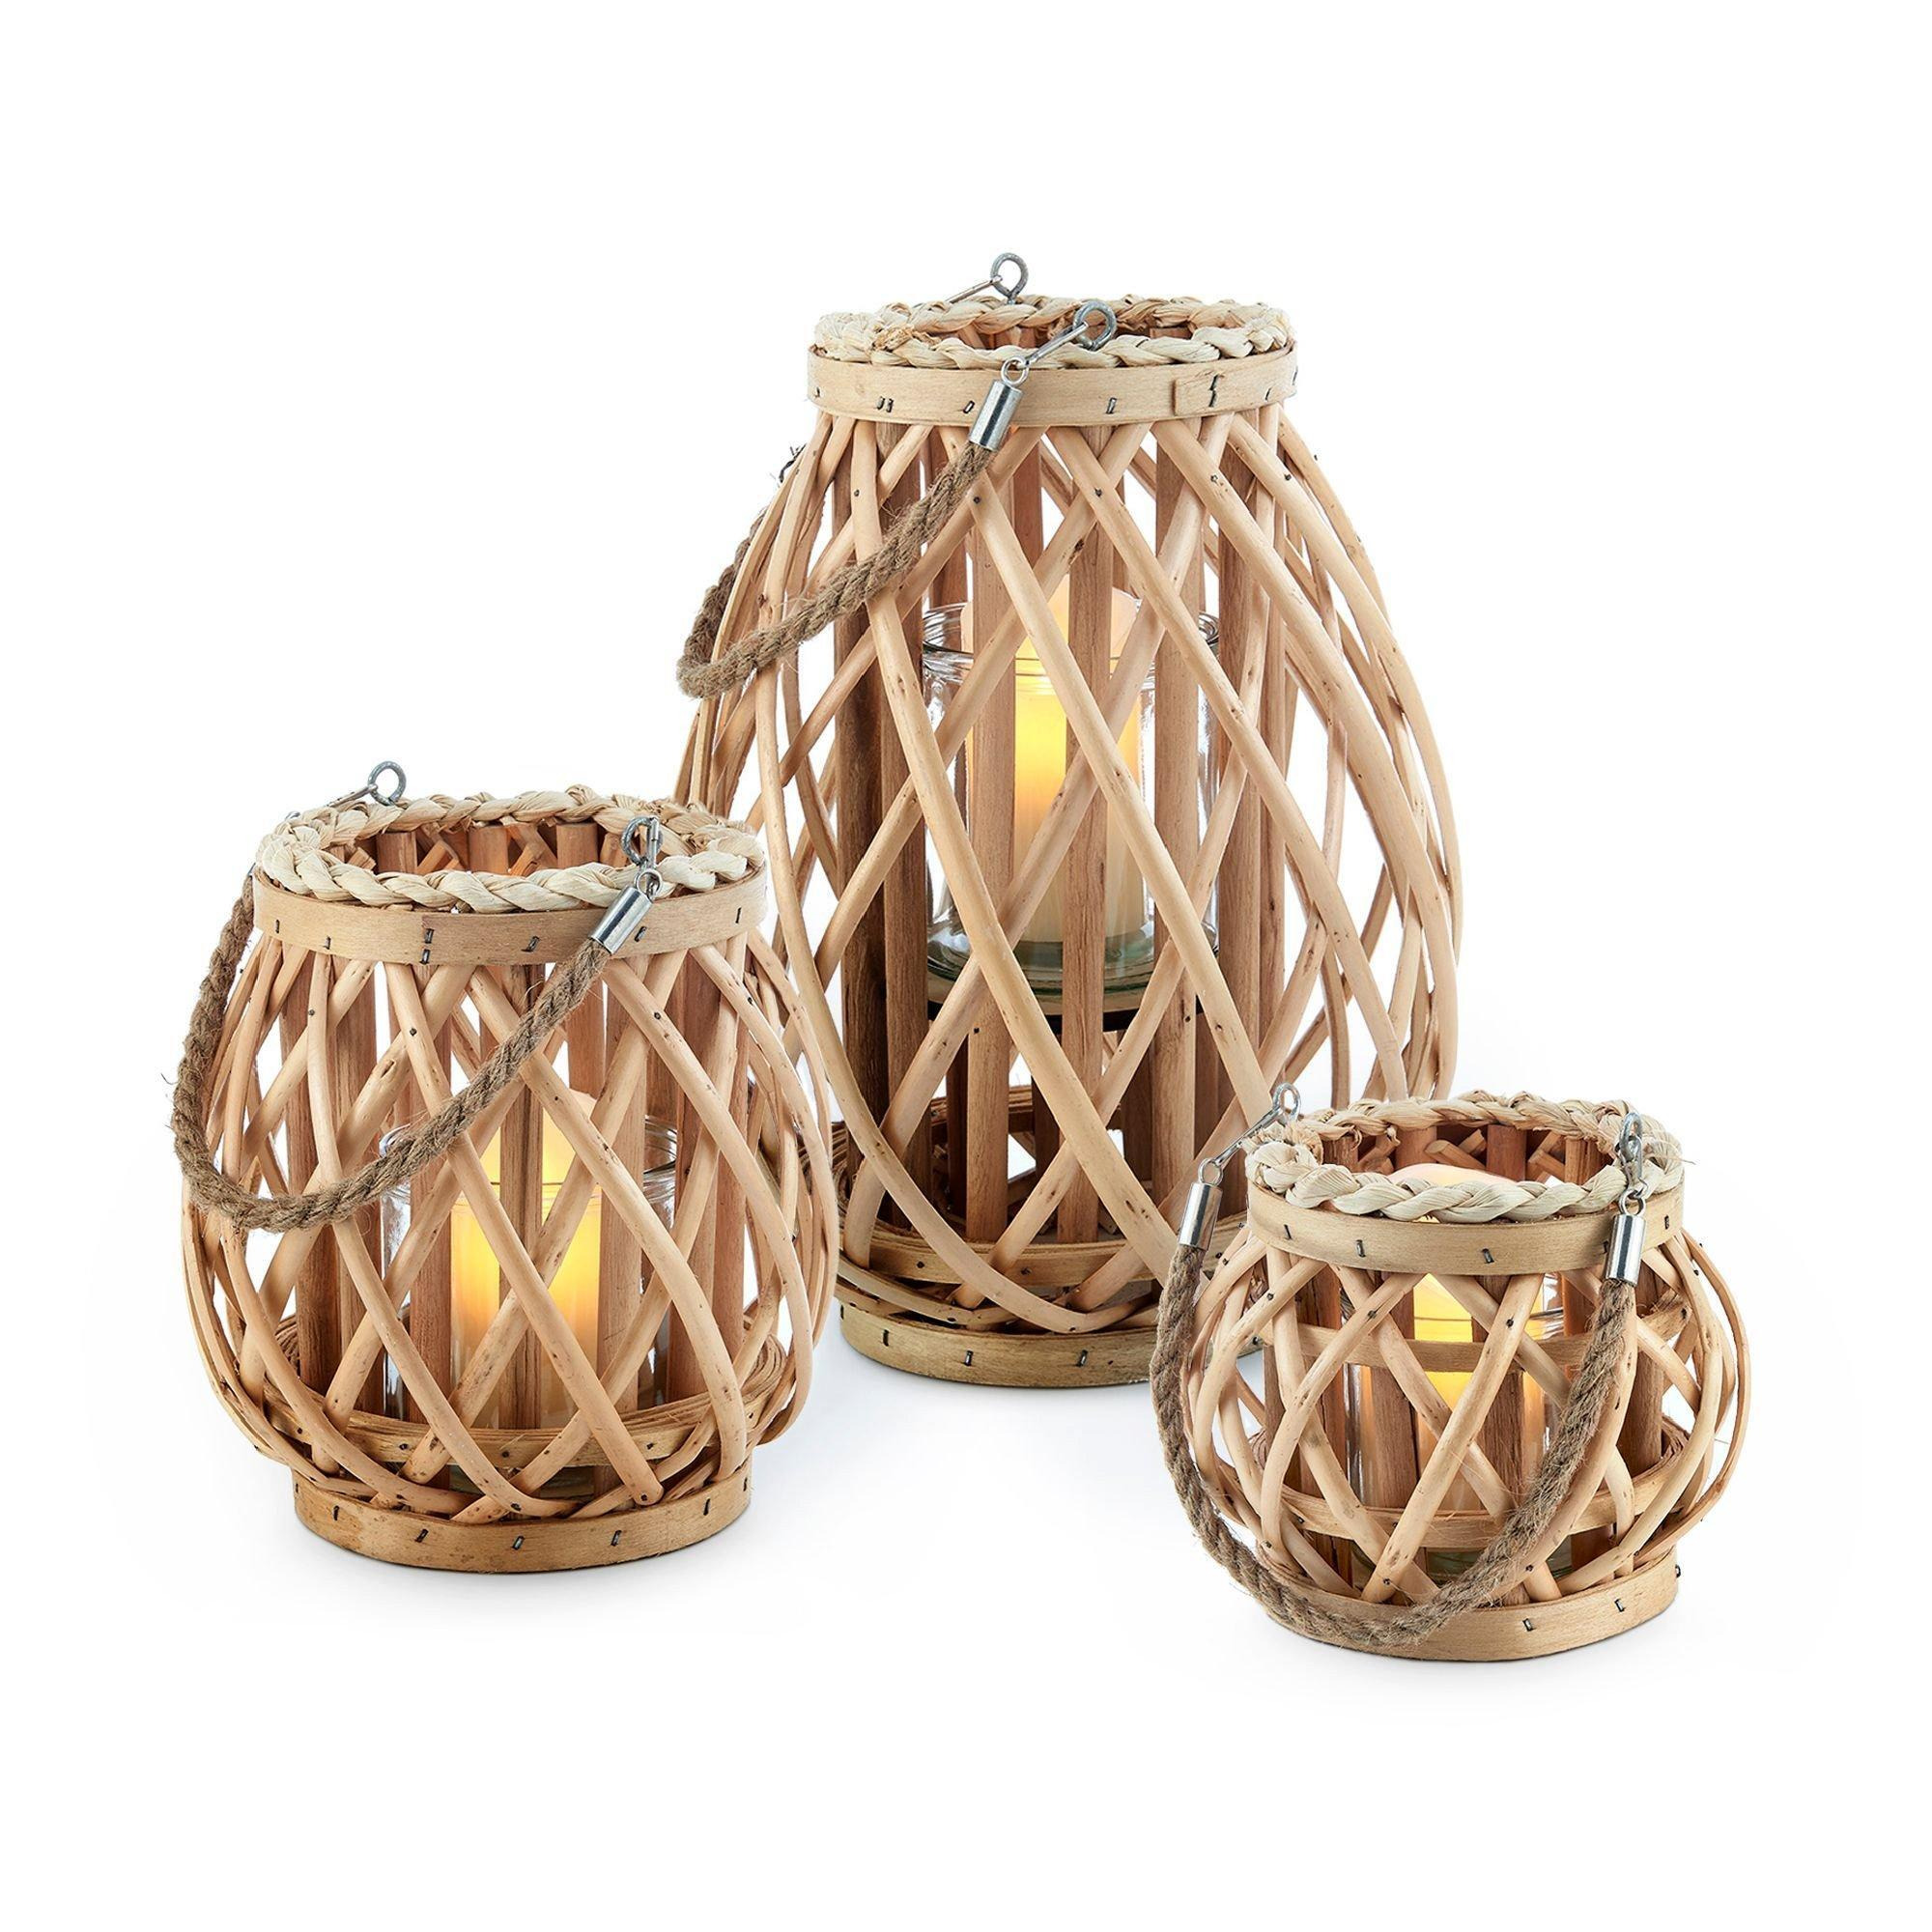 3pc Wicker Willow Candle Lantern Basket Jar - Made from Hemp Rope & Willow Twigs - image 1